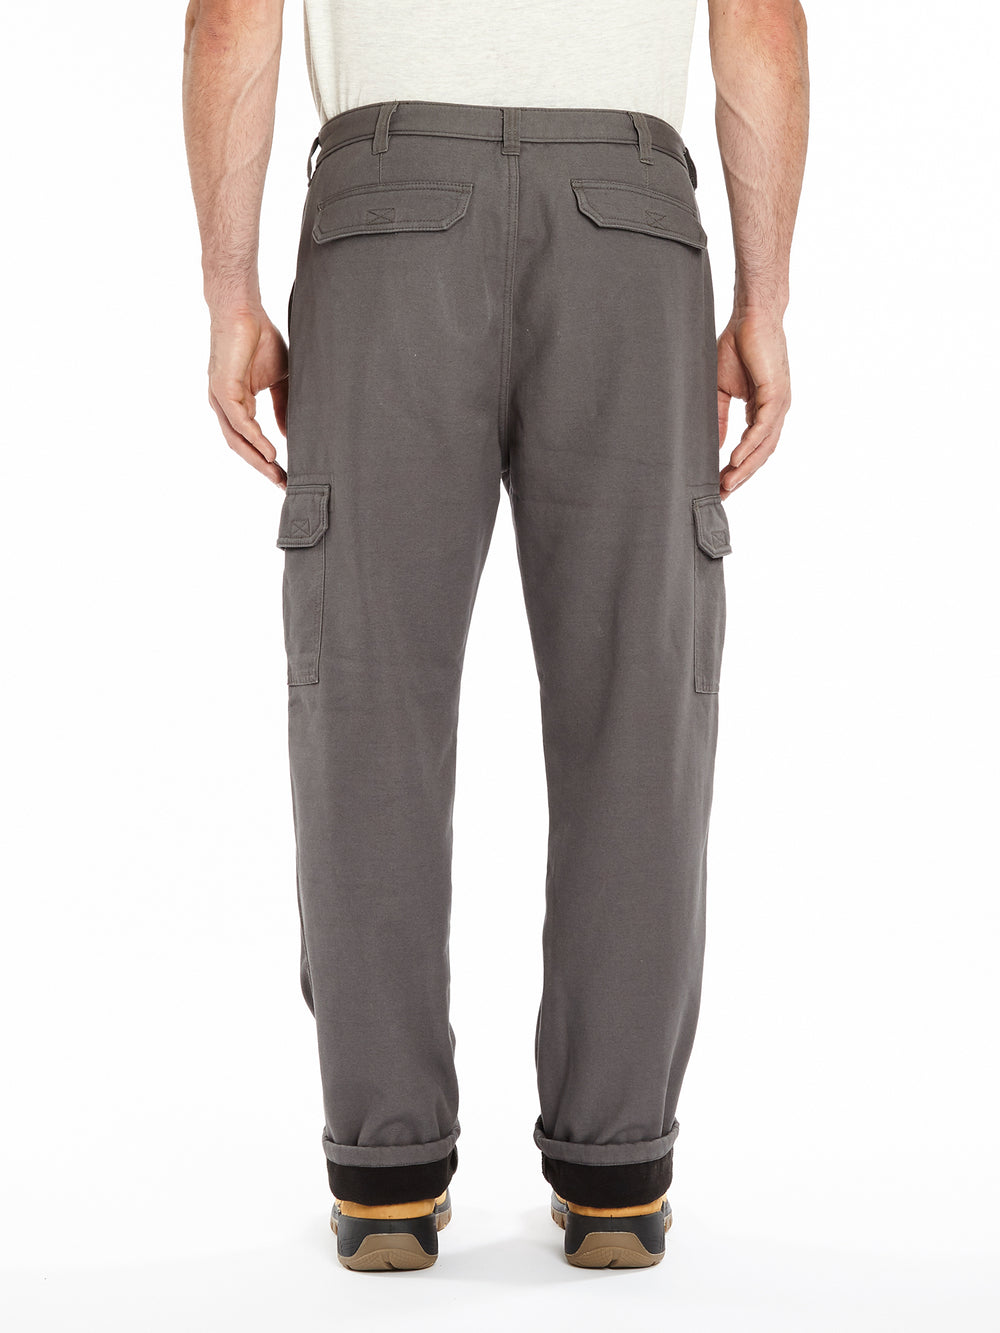 Fleece Lined Cargo Trousers Grey - Hiking Trousers - Outdoorz | Outwear For  Outdoor People